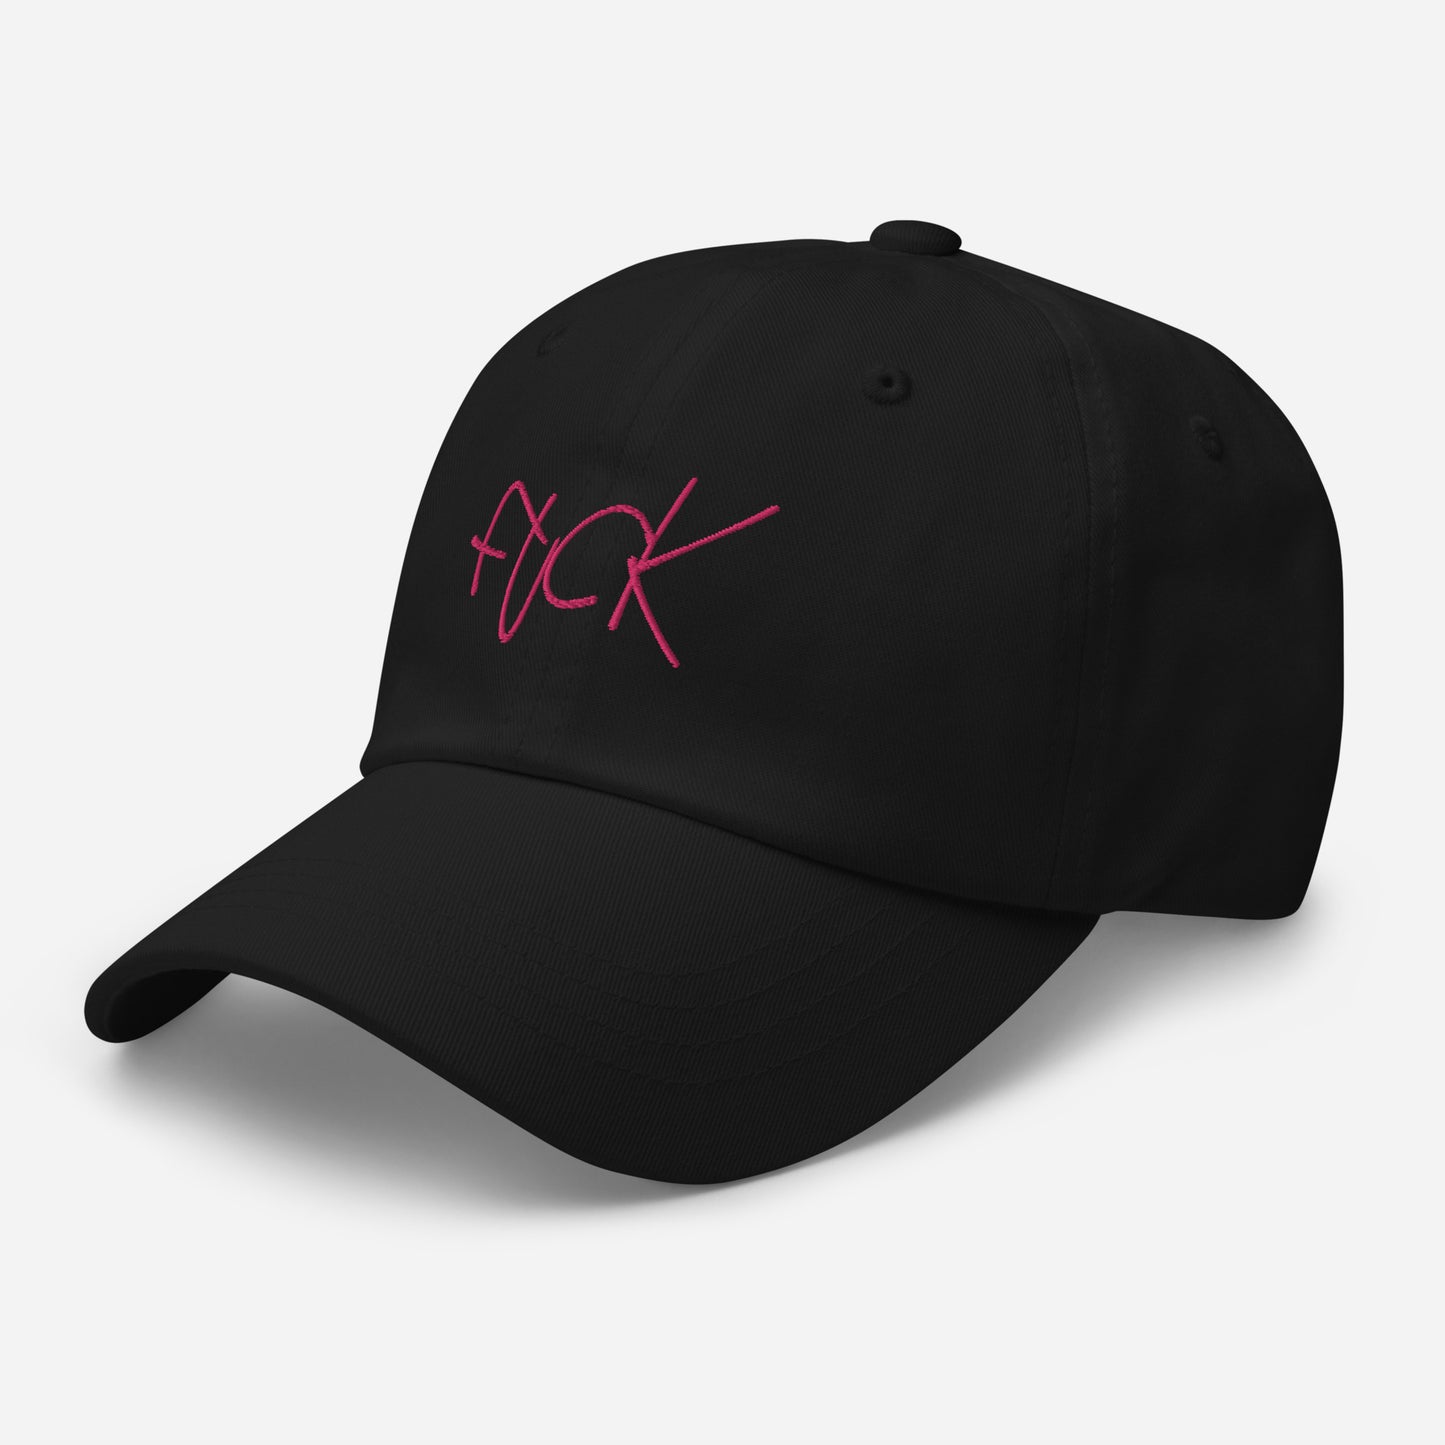 "FVCK" Hat